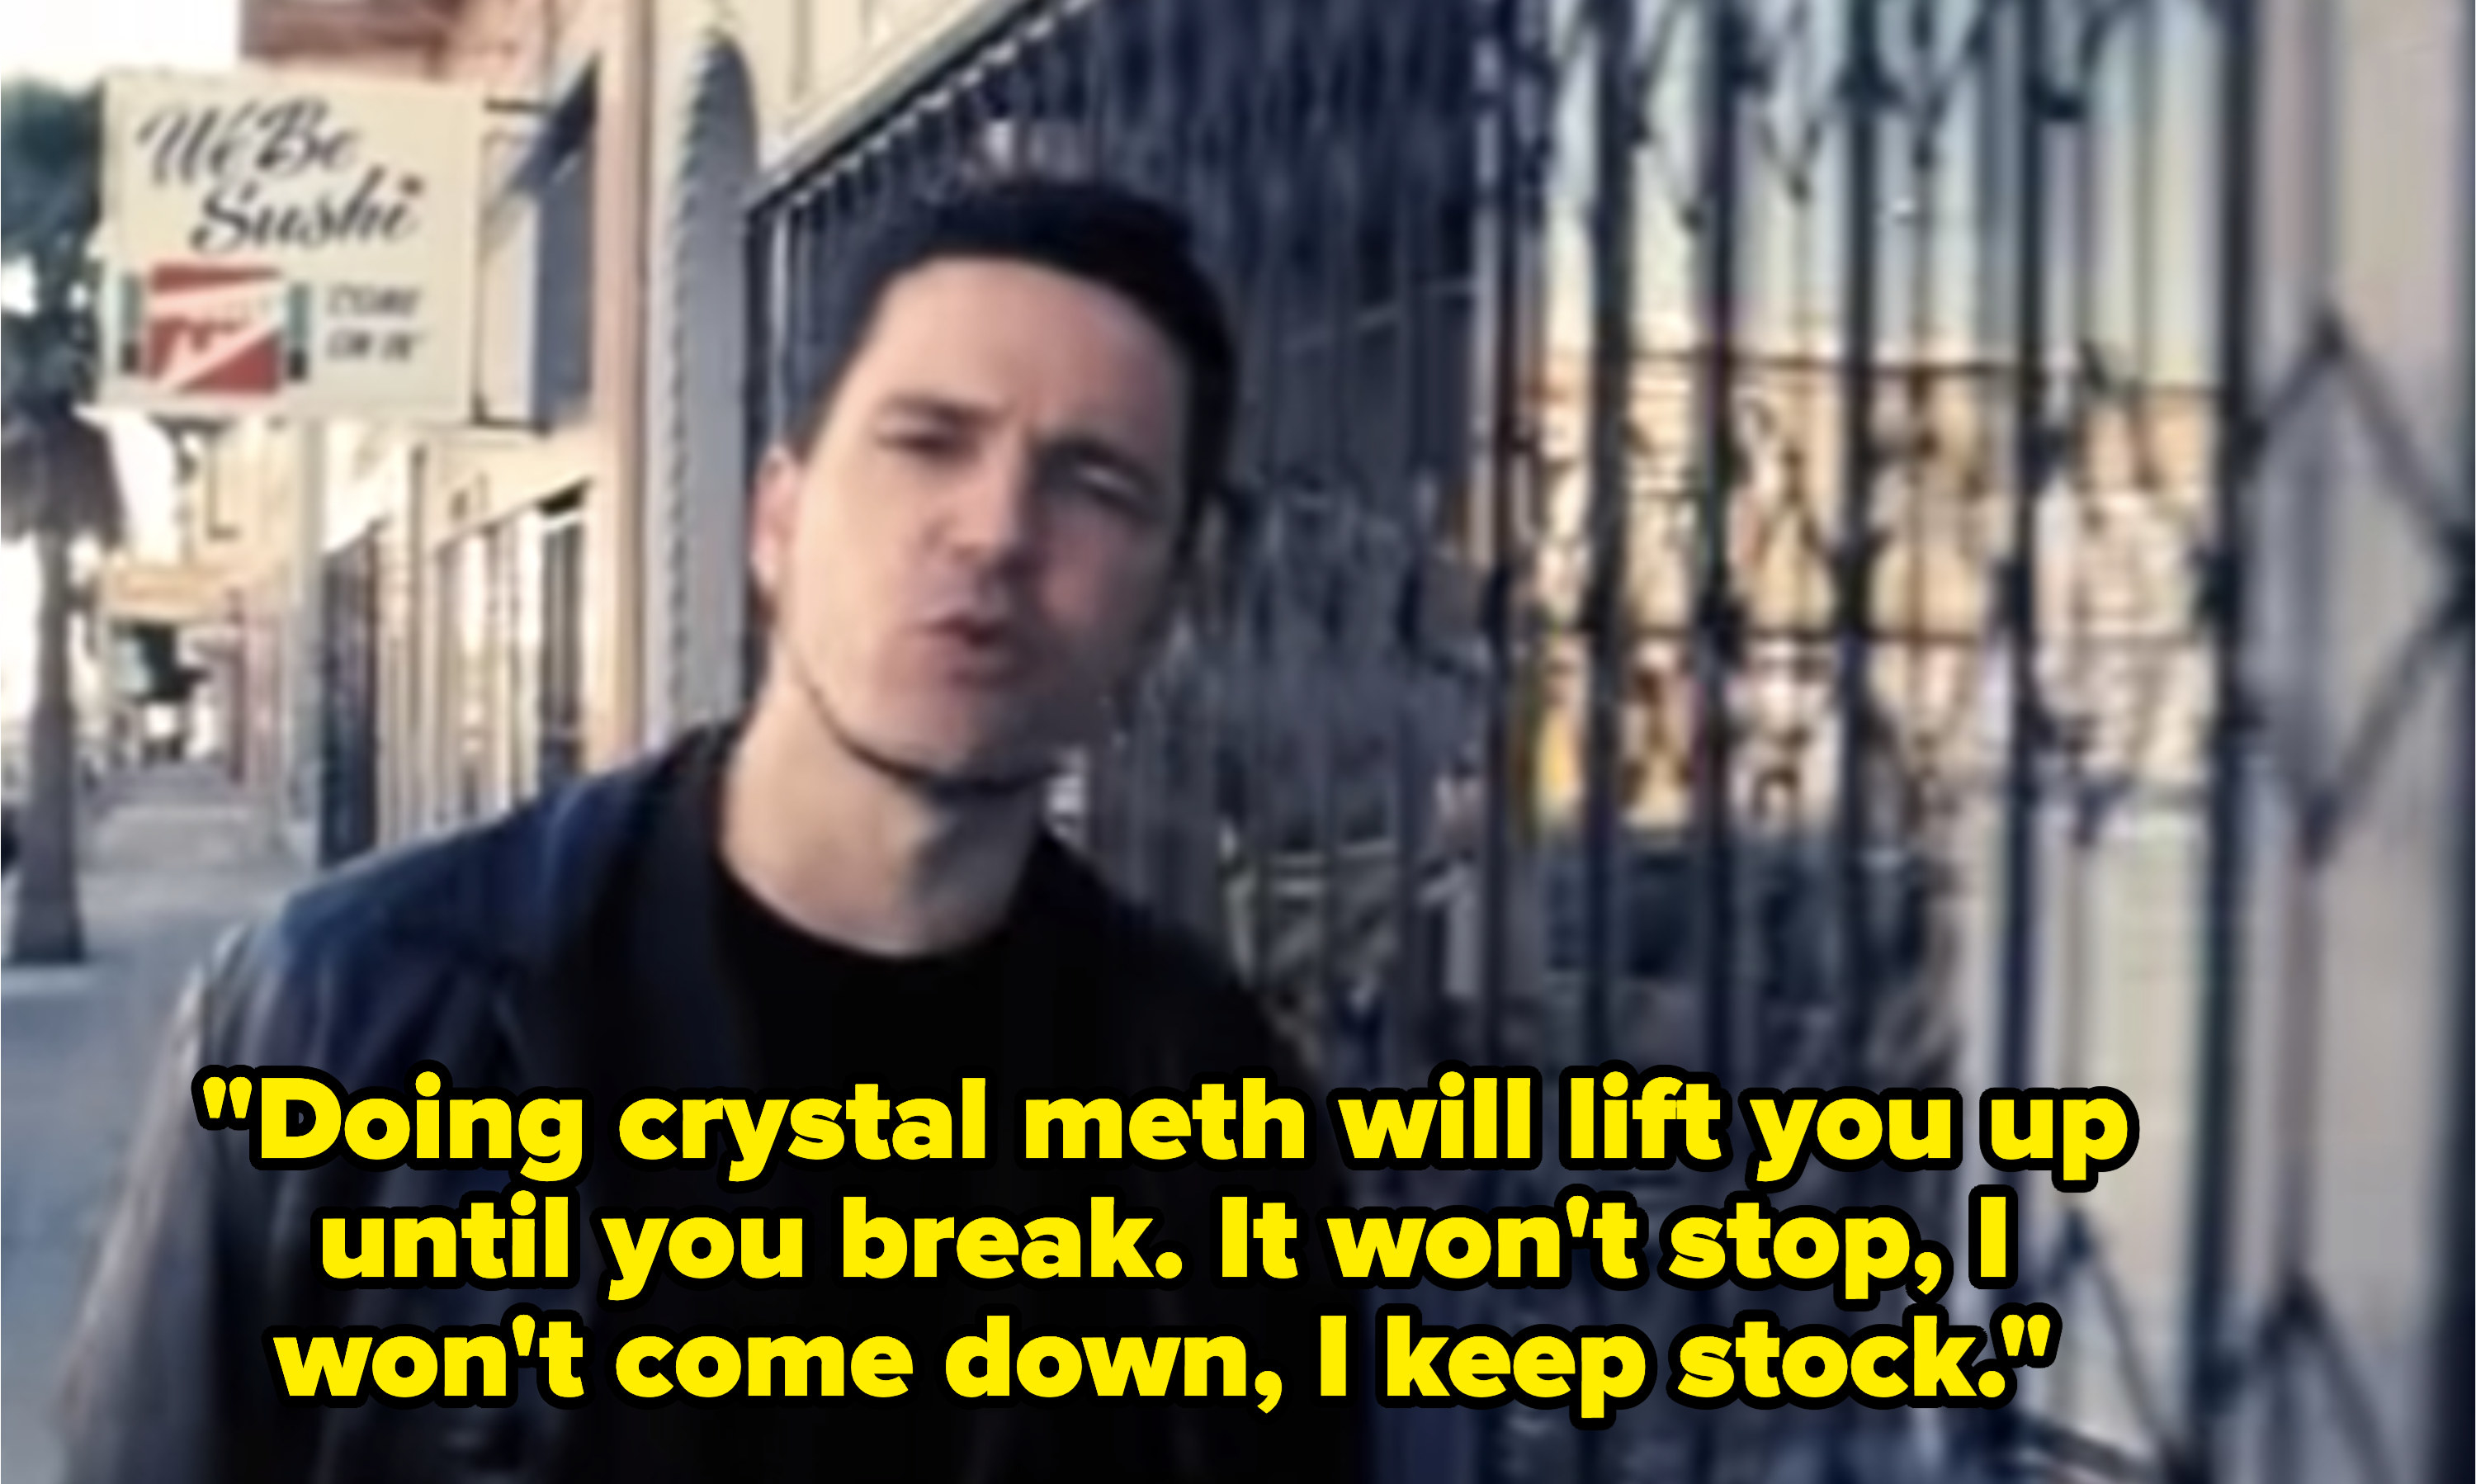 &quot;Semi-Charmed Life&quot; music video with lyrics, &quot;Doing crystal meth will lift you up until you break. It won&#x27;t stop, I won&#x27;t come down, I keep stock&quot;